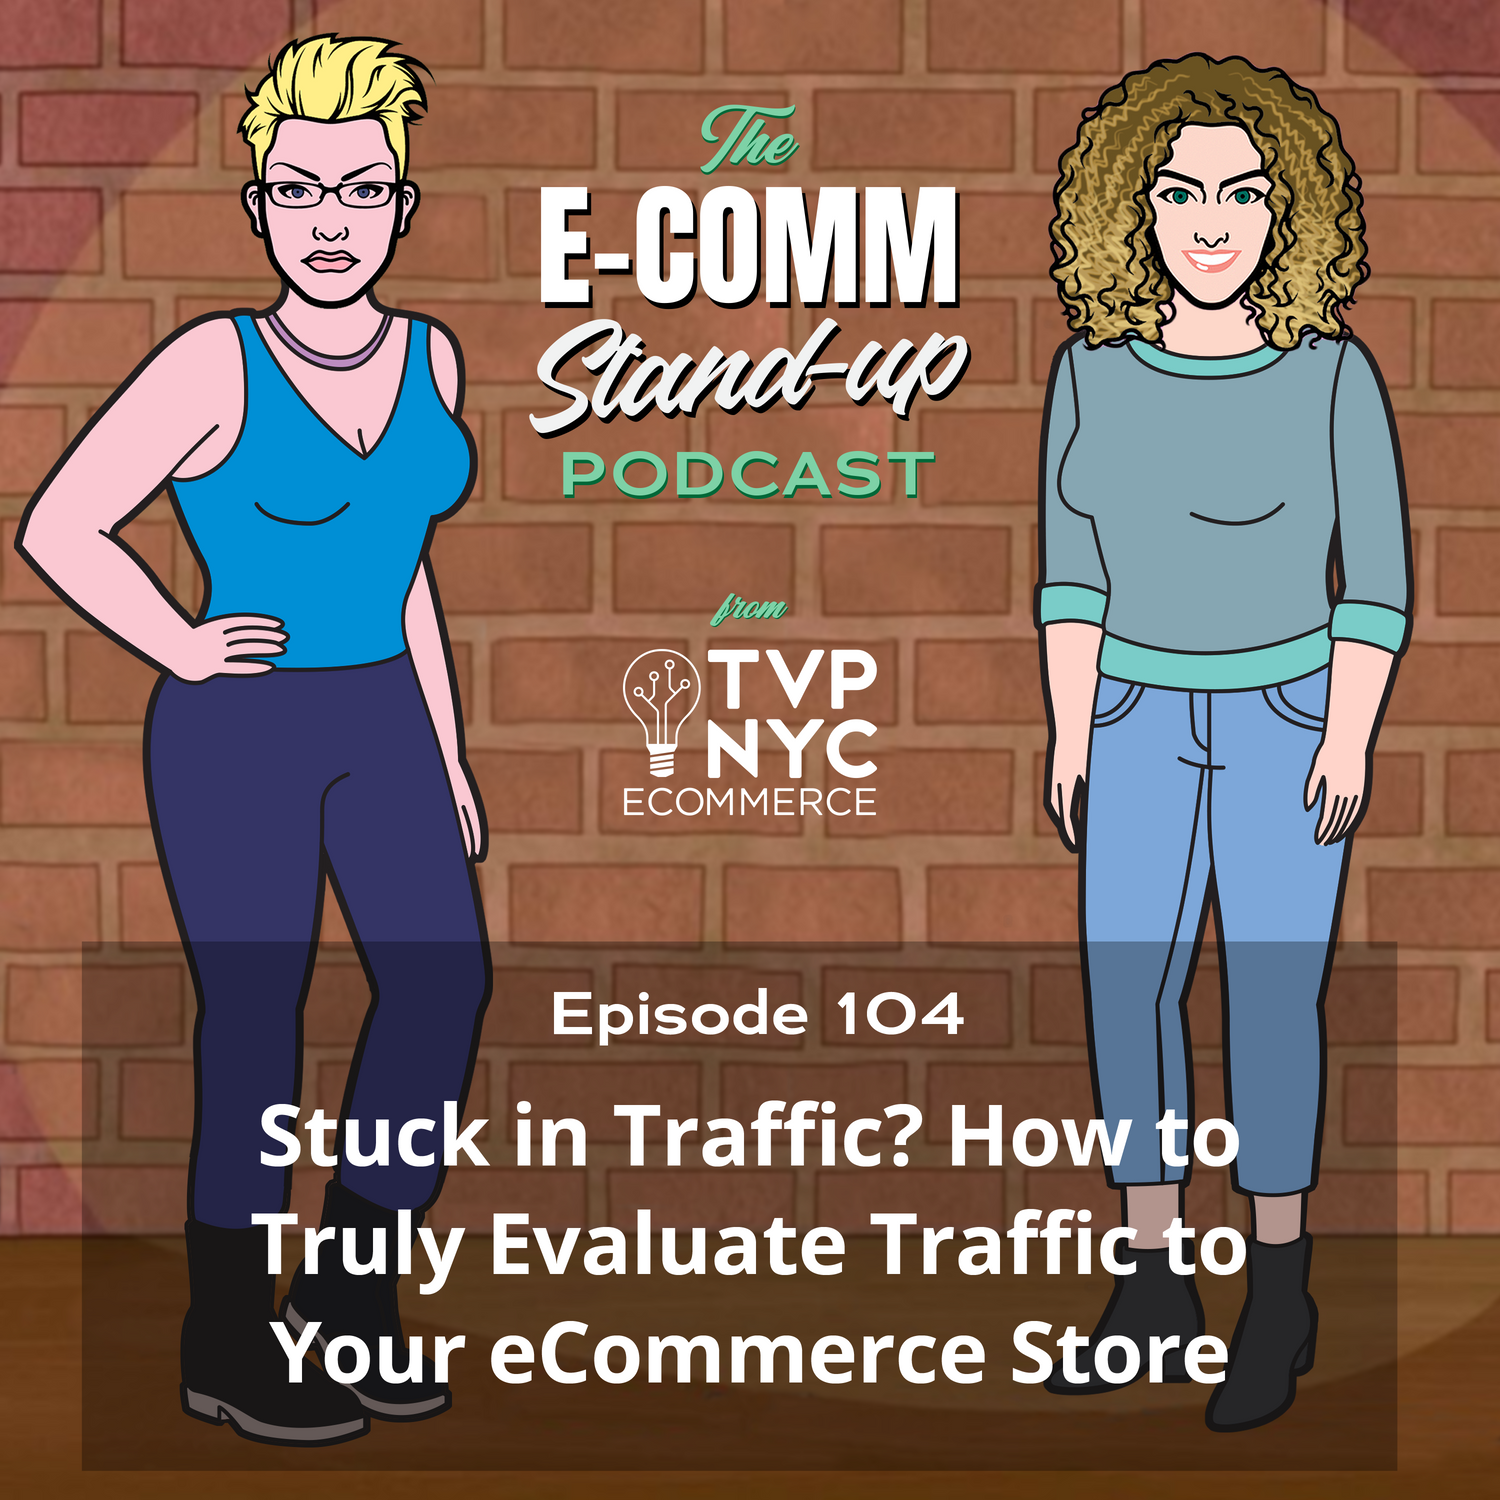 Stuck in Traffic? How to Truly Evaluate Traffic to Your eCommerce Store